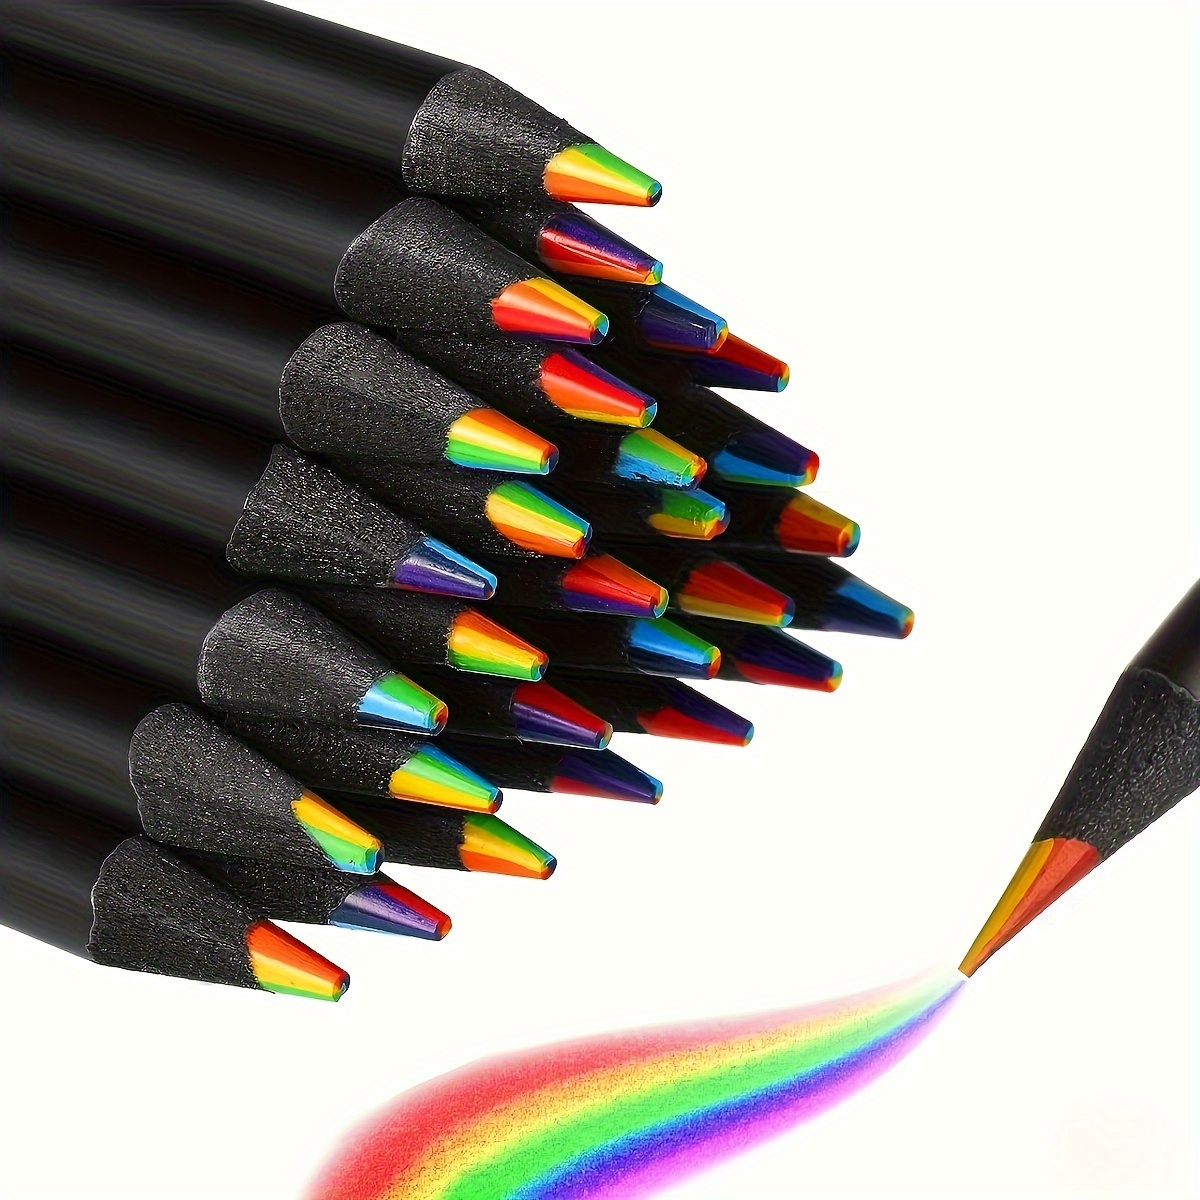 ThEast Black Wooden Rainbow Colored Pencils, 7 Color in 1 Rainbow Pencils, Art Supplies for Kids and Adults, Assorted Colors for Drawing Coloring